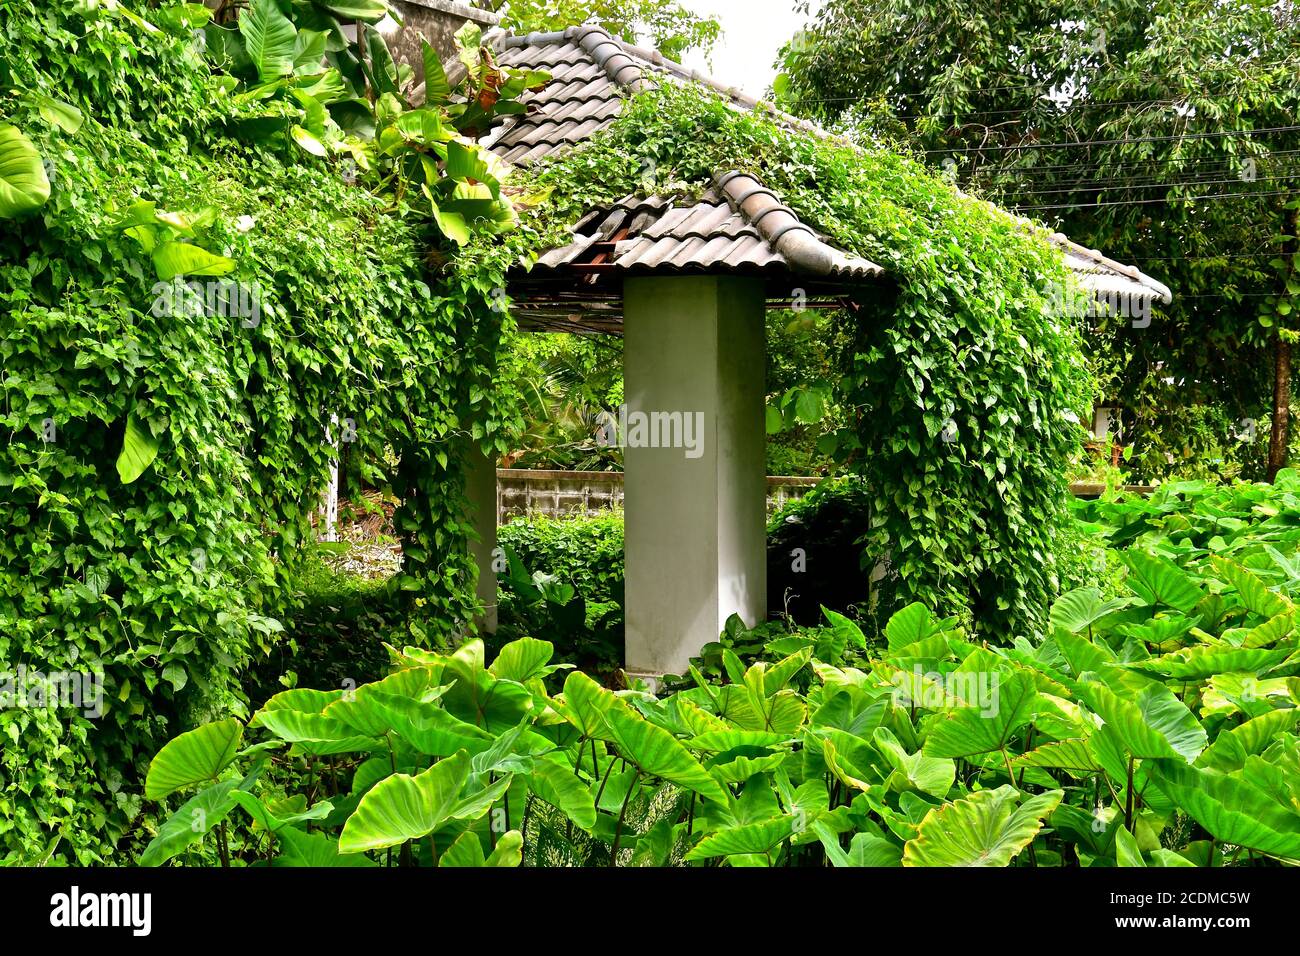 An abandoned overgrown derelict house covered with tropical greenery. Stock Photo